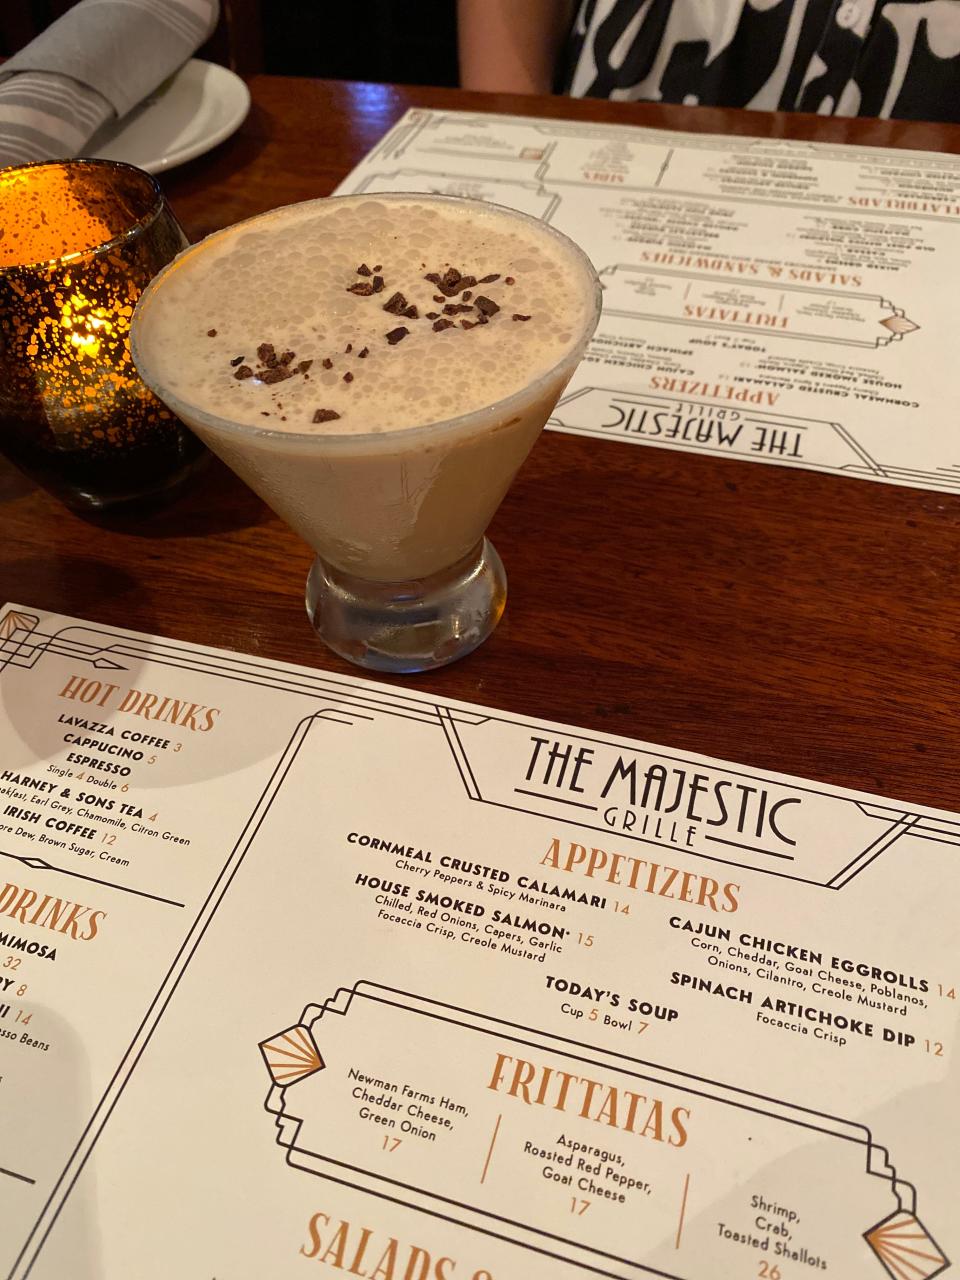 Weekend brunch returns to The Majestic Grille after a year-long hiatus. Start with a Vanilla Espresso Martini topped with chocolate espresso beans from Dinstuhl’s candy shop.